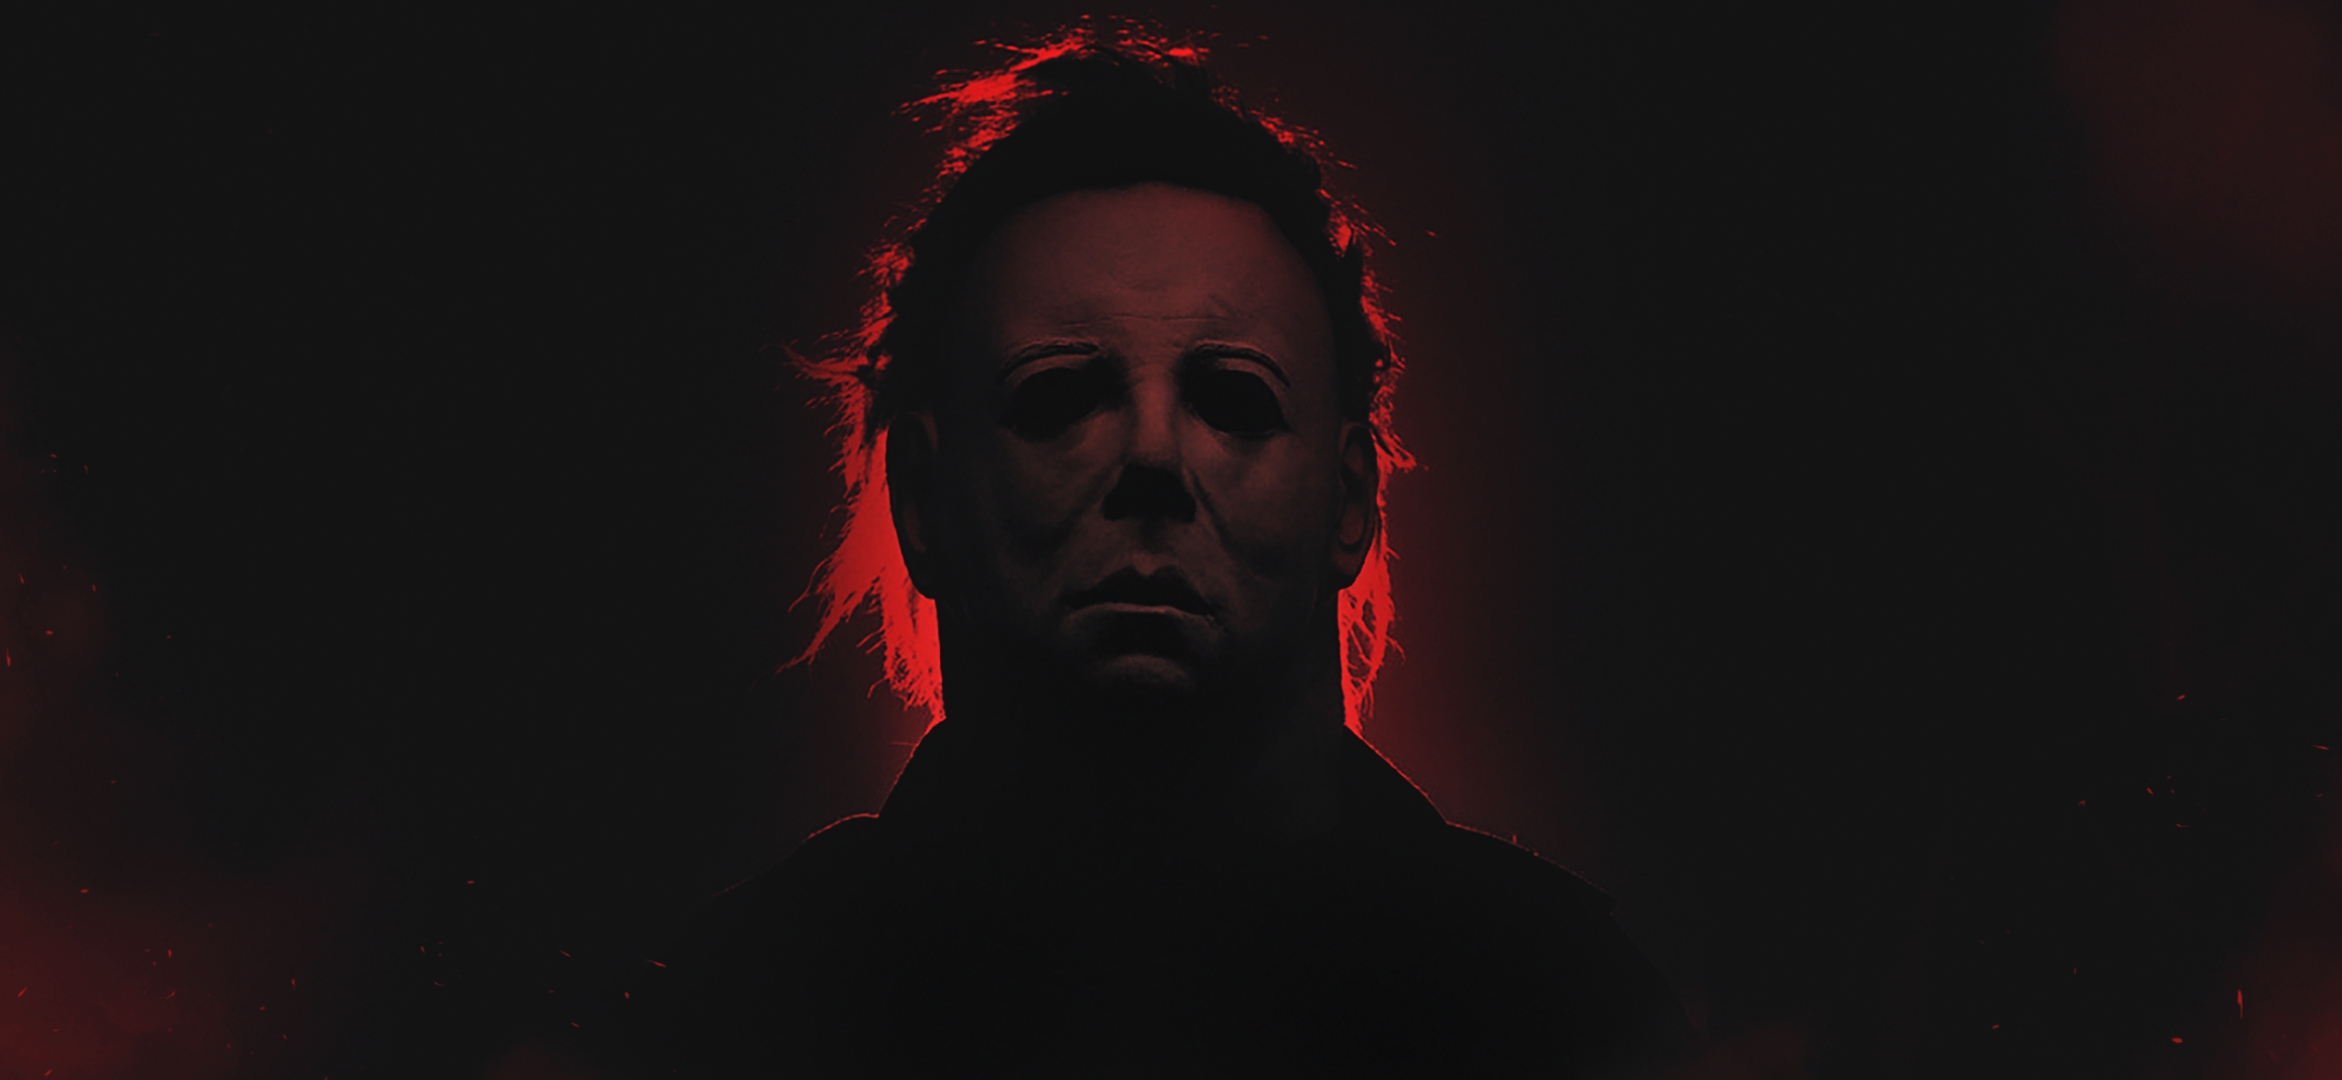 10 Most Popular Michael Myers Wallpaper Hd FULL HD 1920×1080 For PC Background